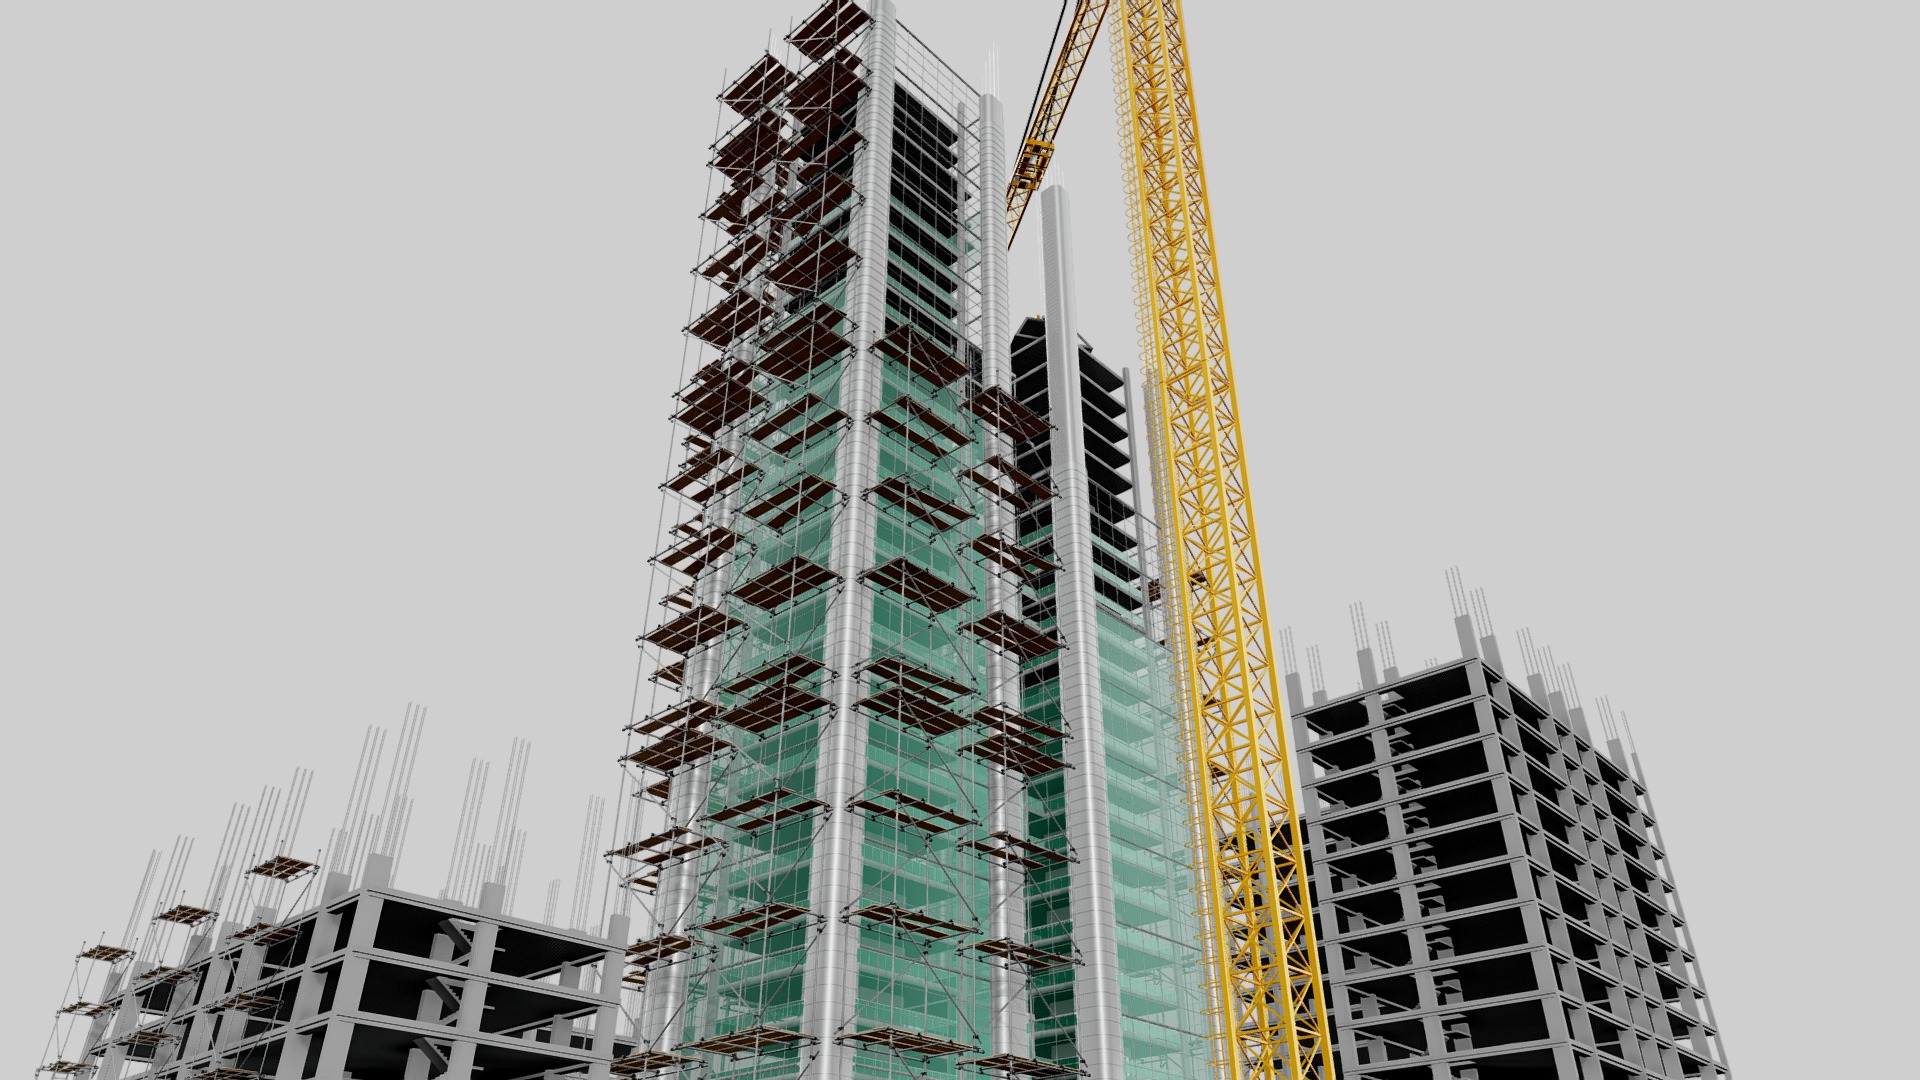 3D model 3D_Building_Construction - This is a 3D model of the 3D_Building_Construction. The 3D model is about a tall building with a tower.